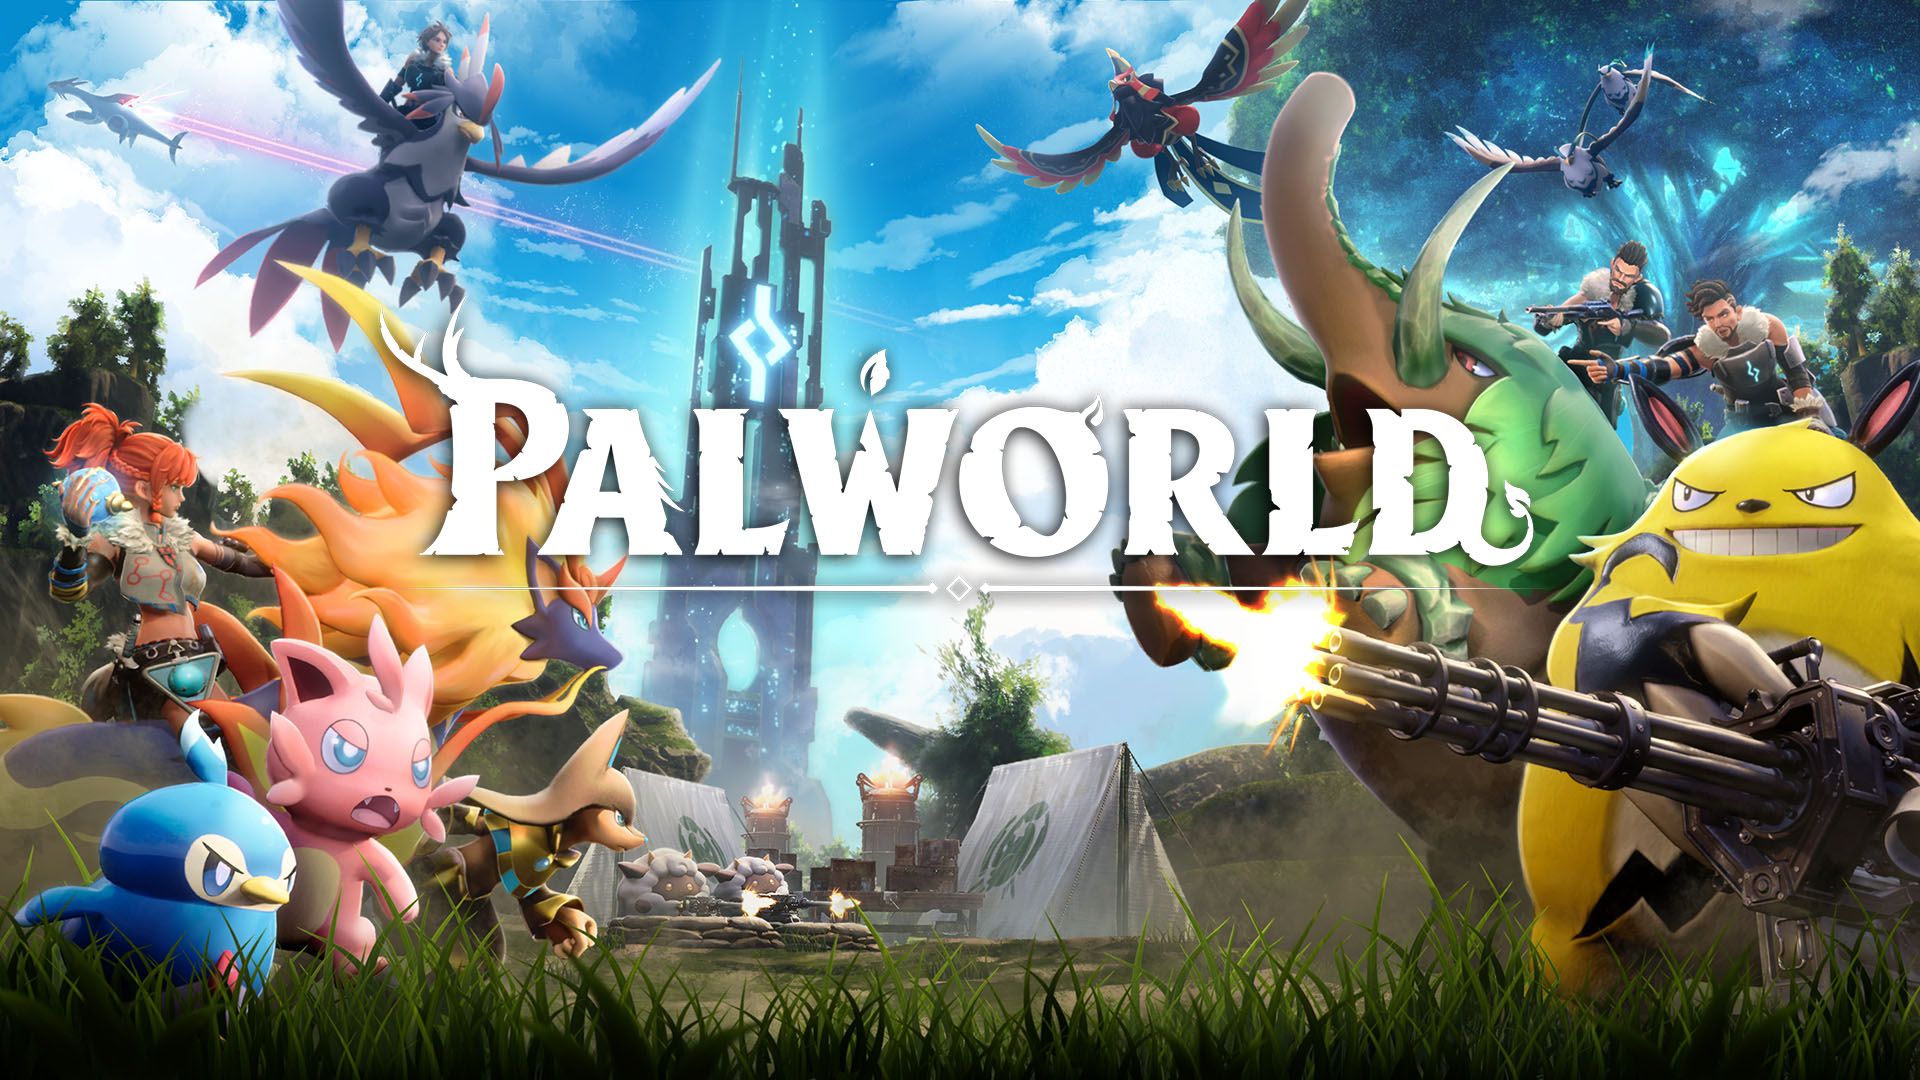 Palworld: Developer shares exciting details from the development of Palworld